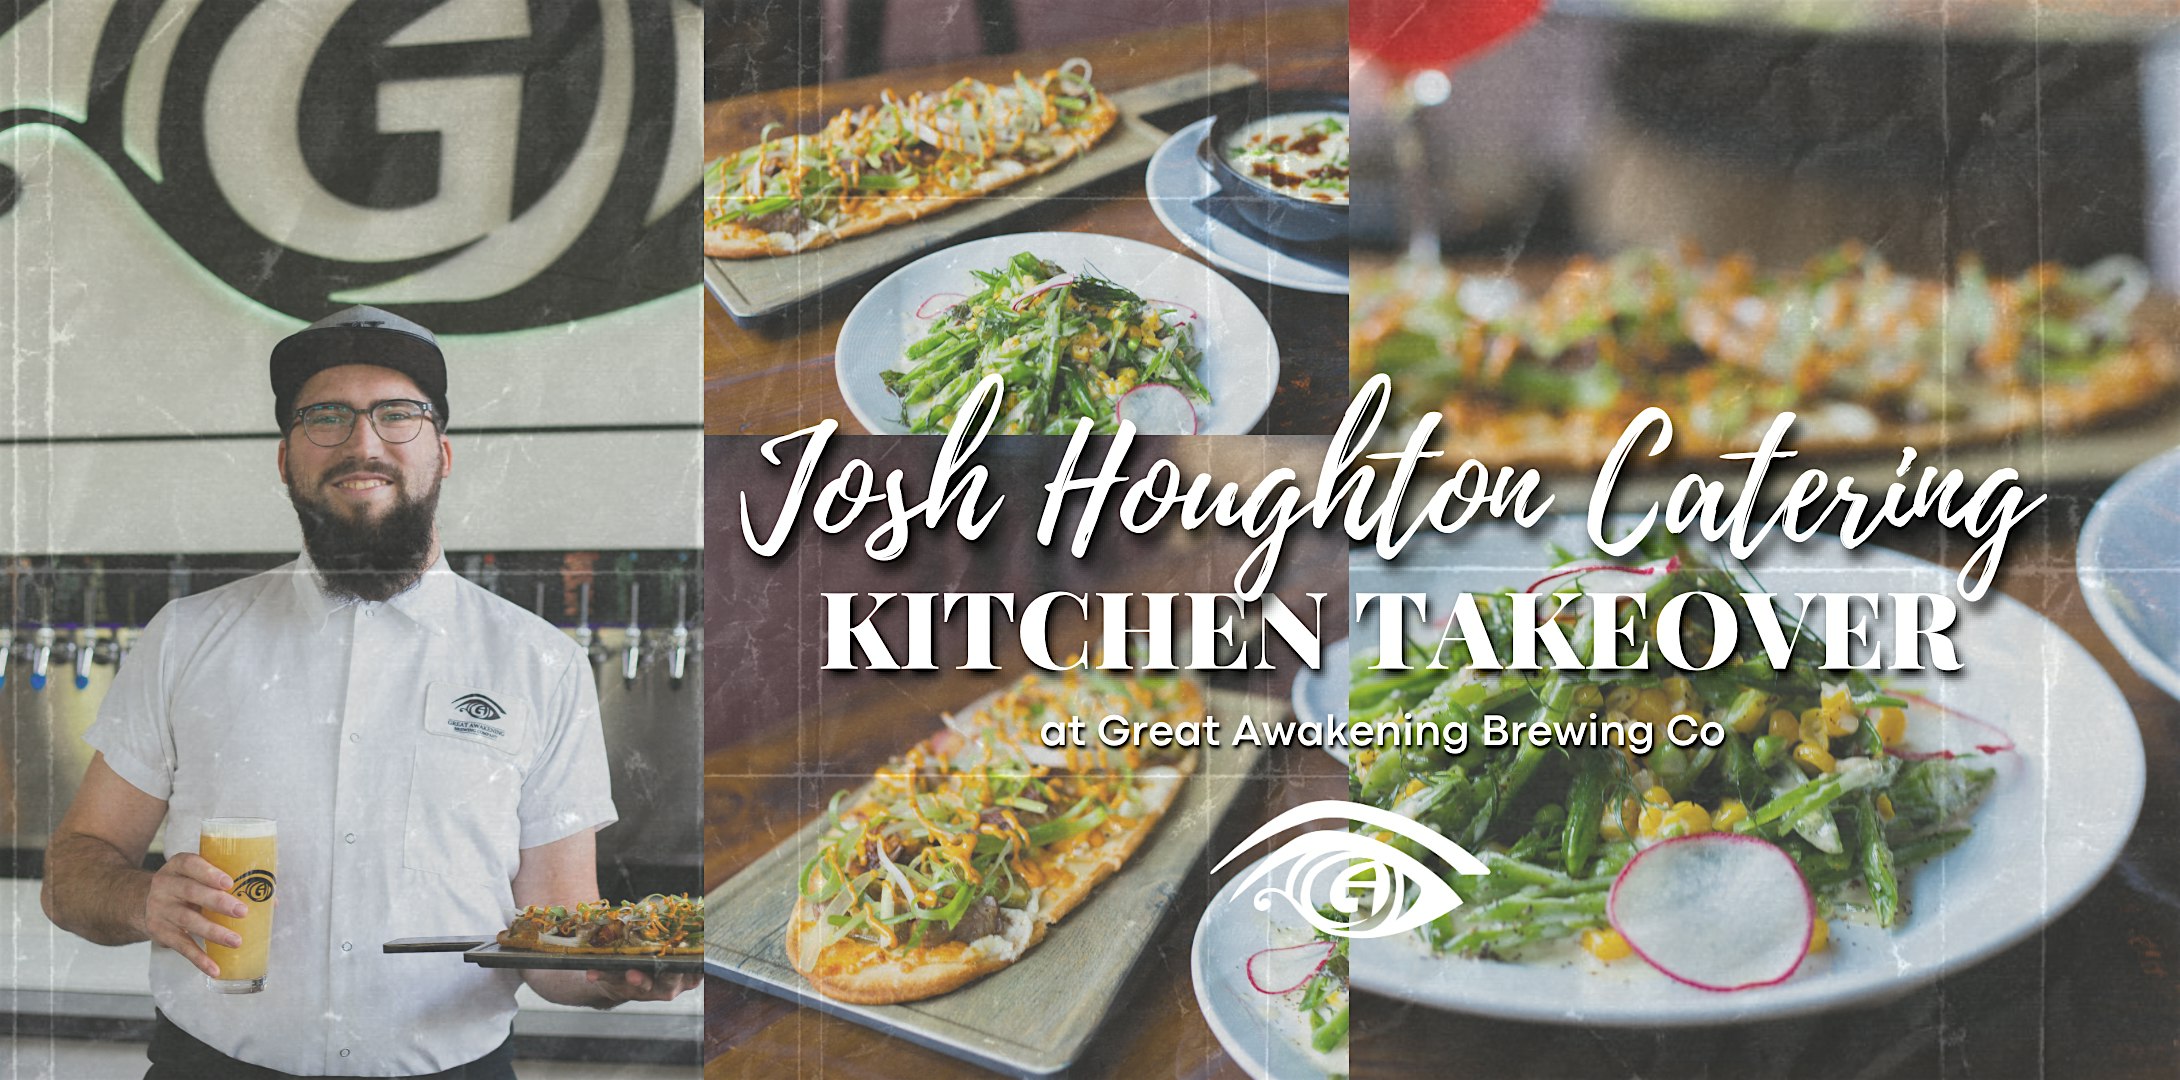 Joshua Houghton Kitchen Takeover (Reservations Recommended)